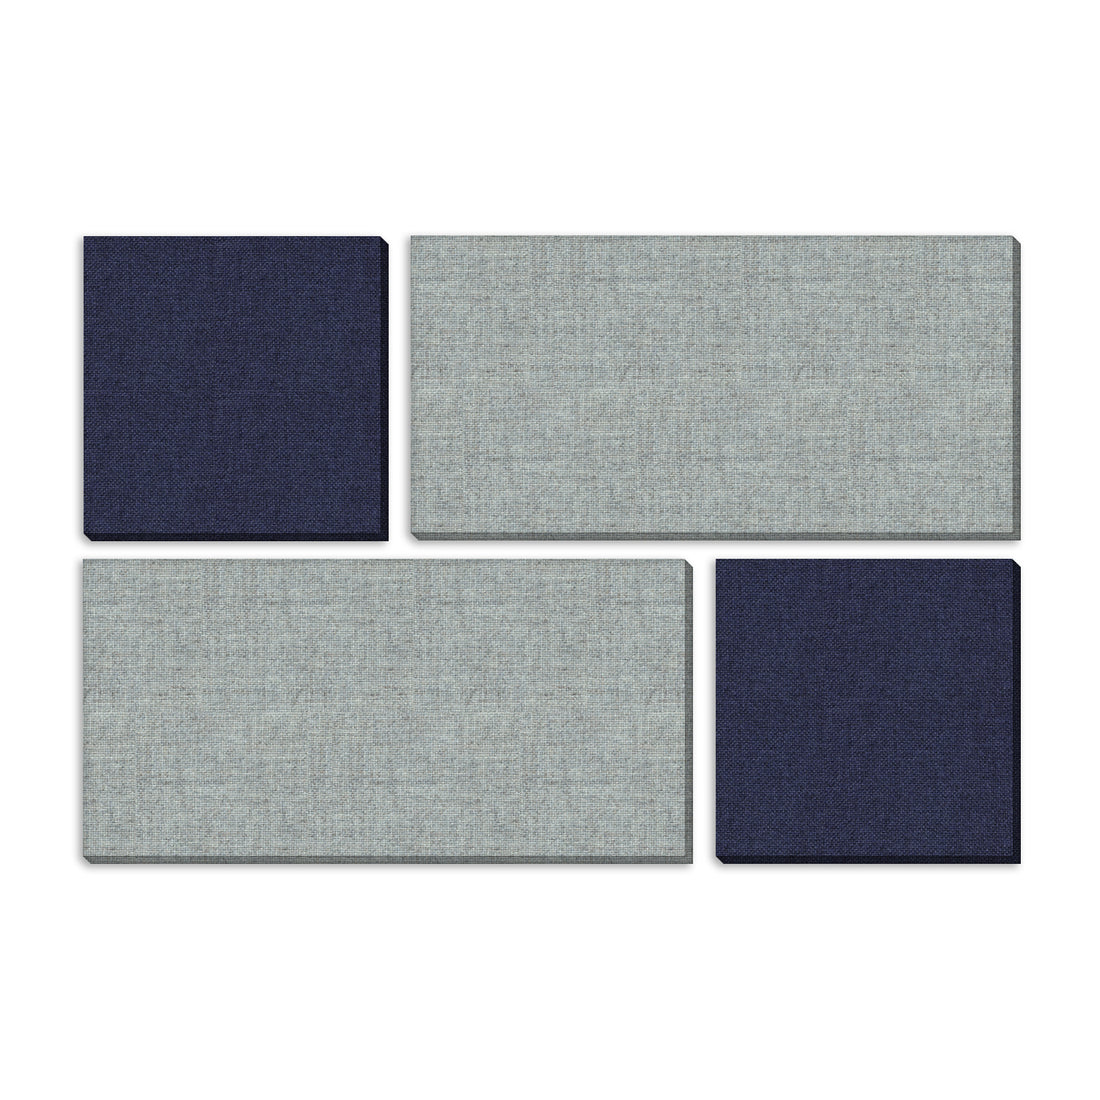 Blueberry Patch Mondrian acoustic  wall panel kit